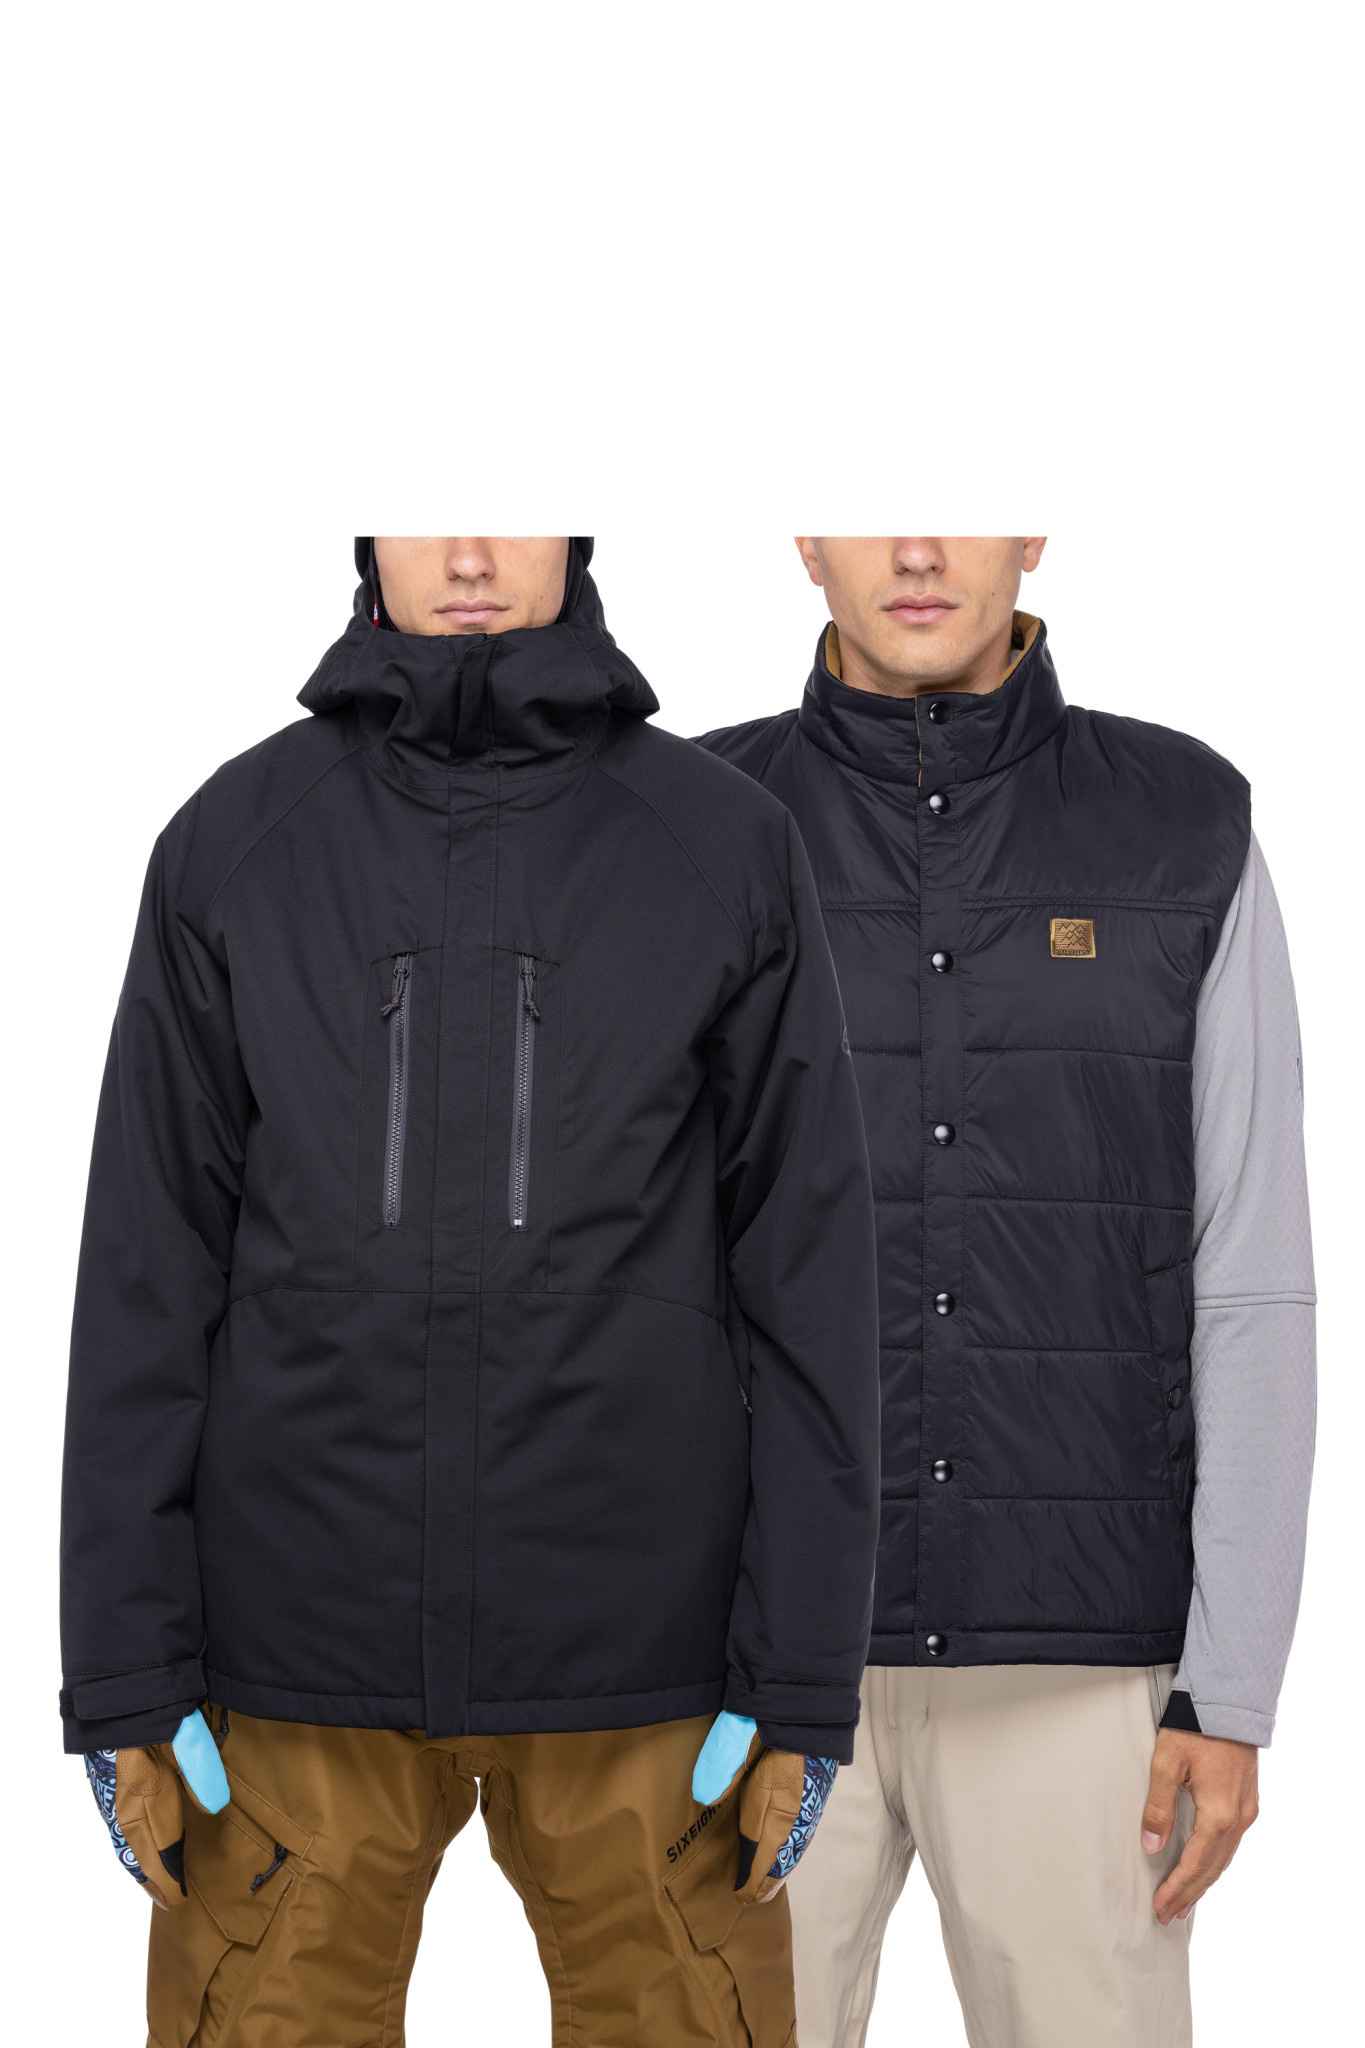 686 686 M's SMARTY 3-In-1 State Jacket